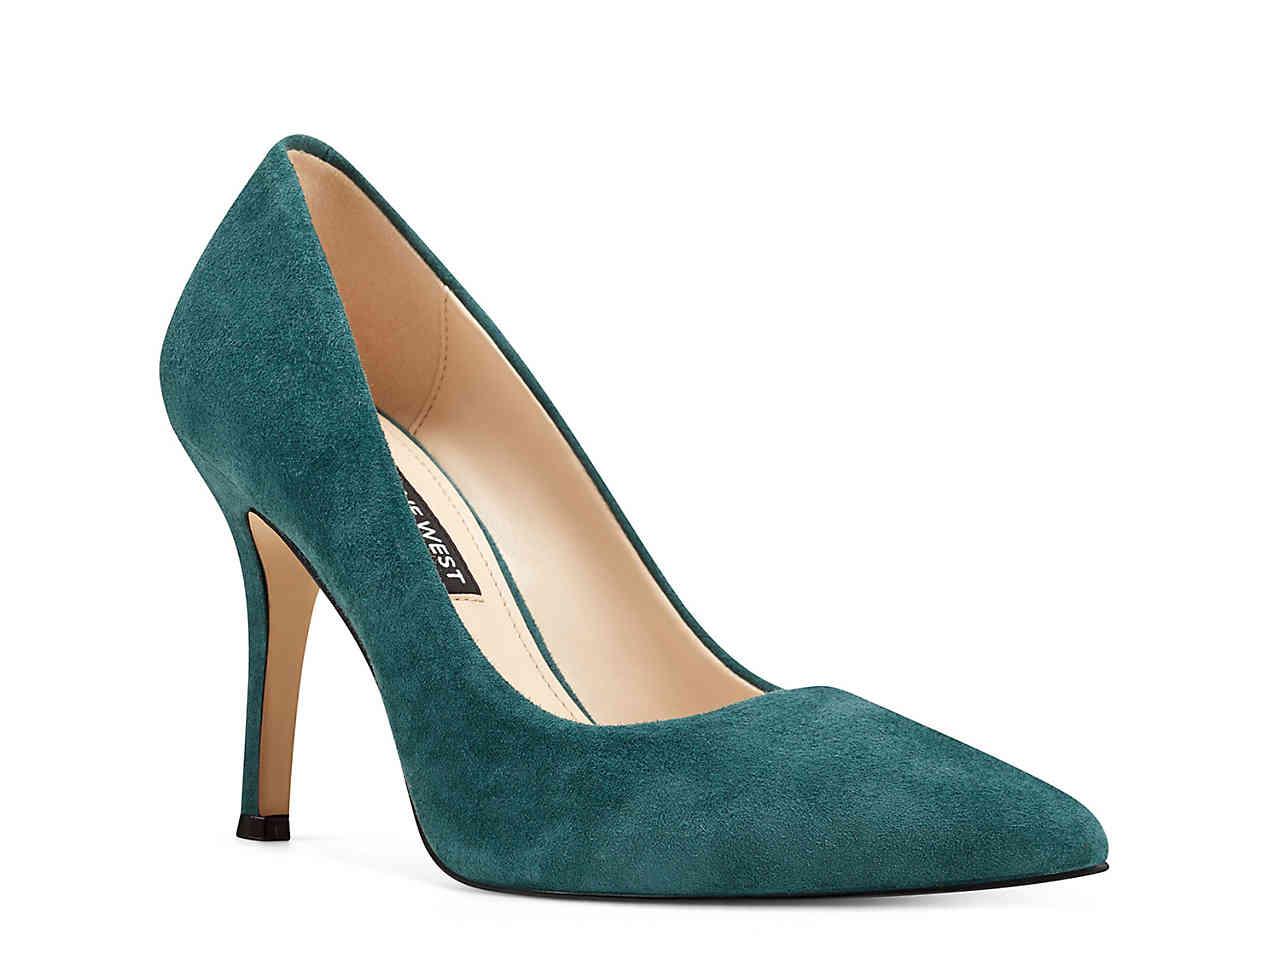 Nine West Suede Flax Pointed Toe Pumps in Emerald Green (Green) - Save ...